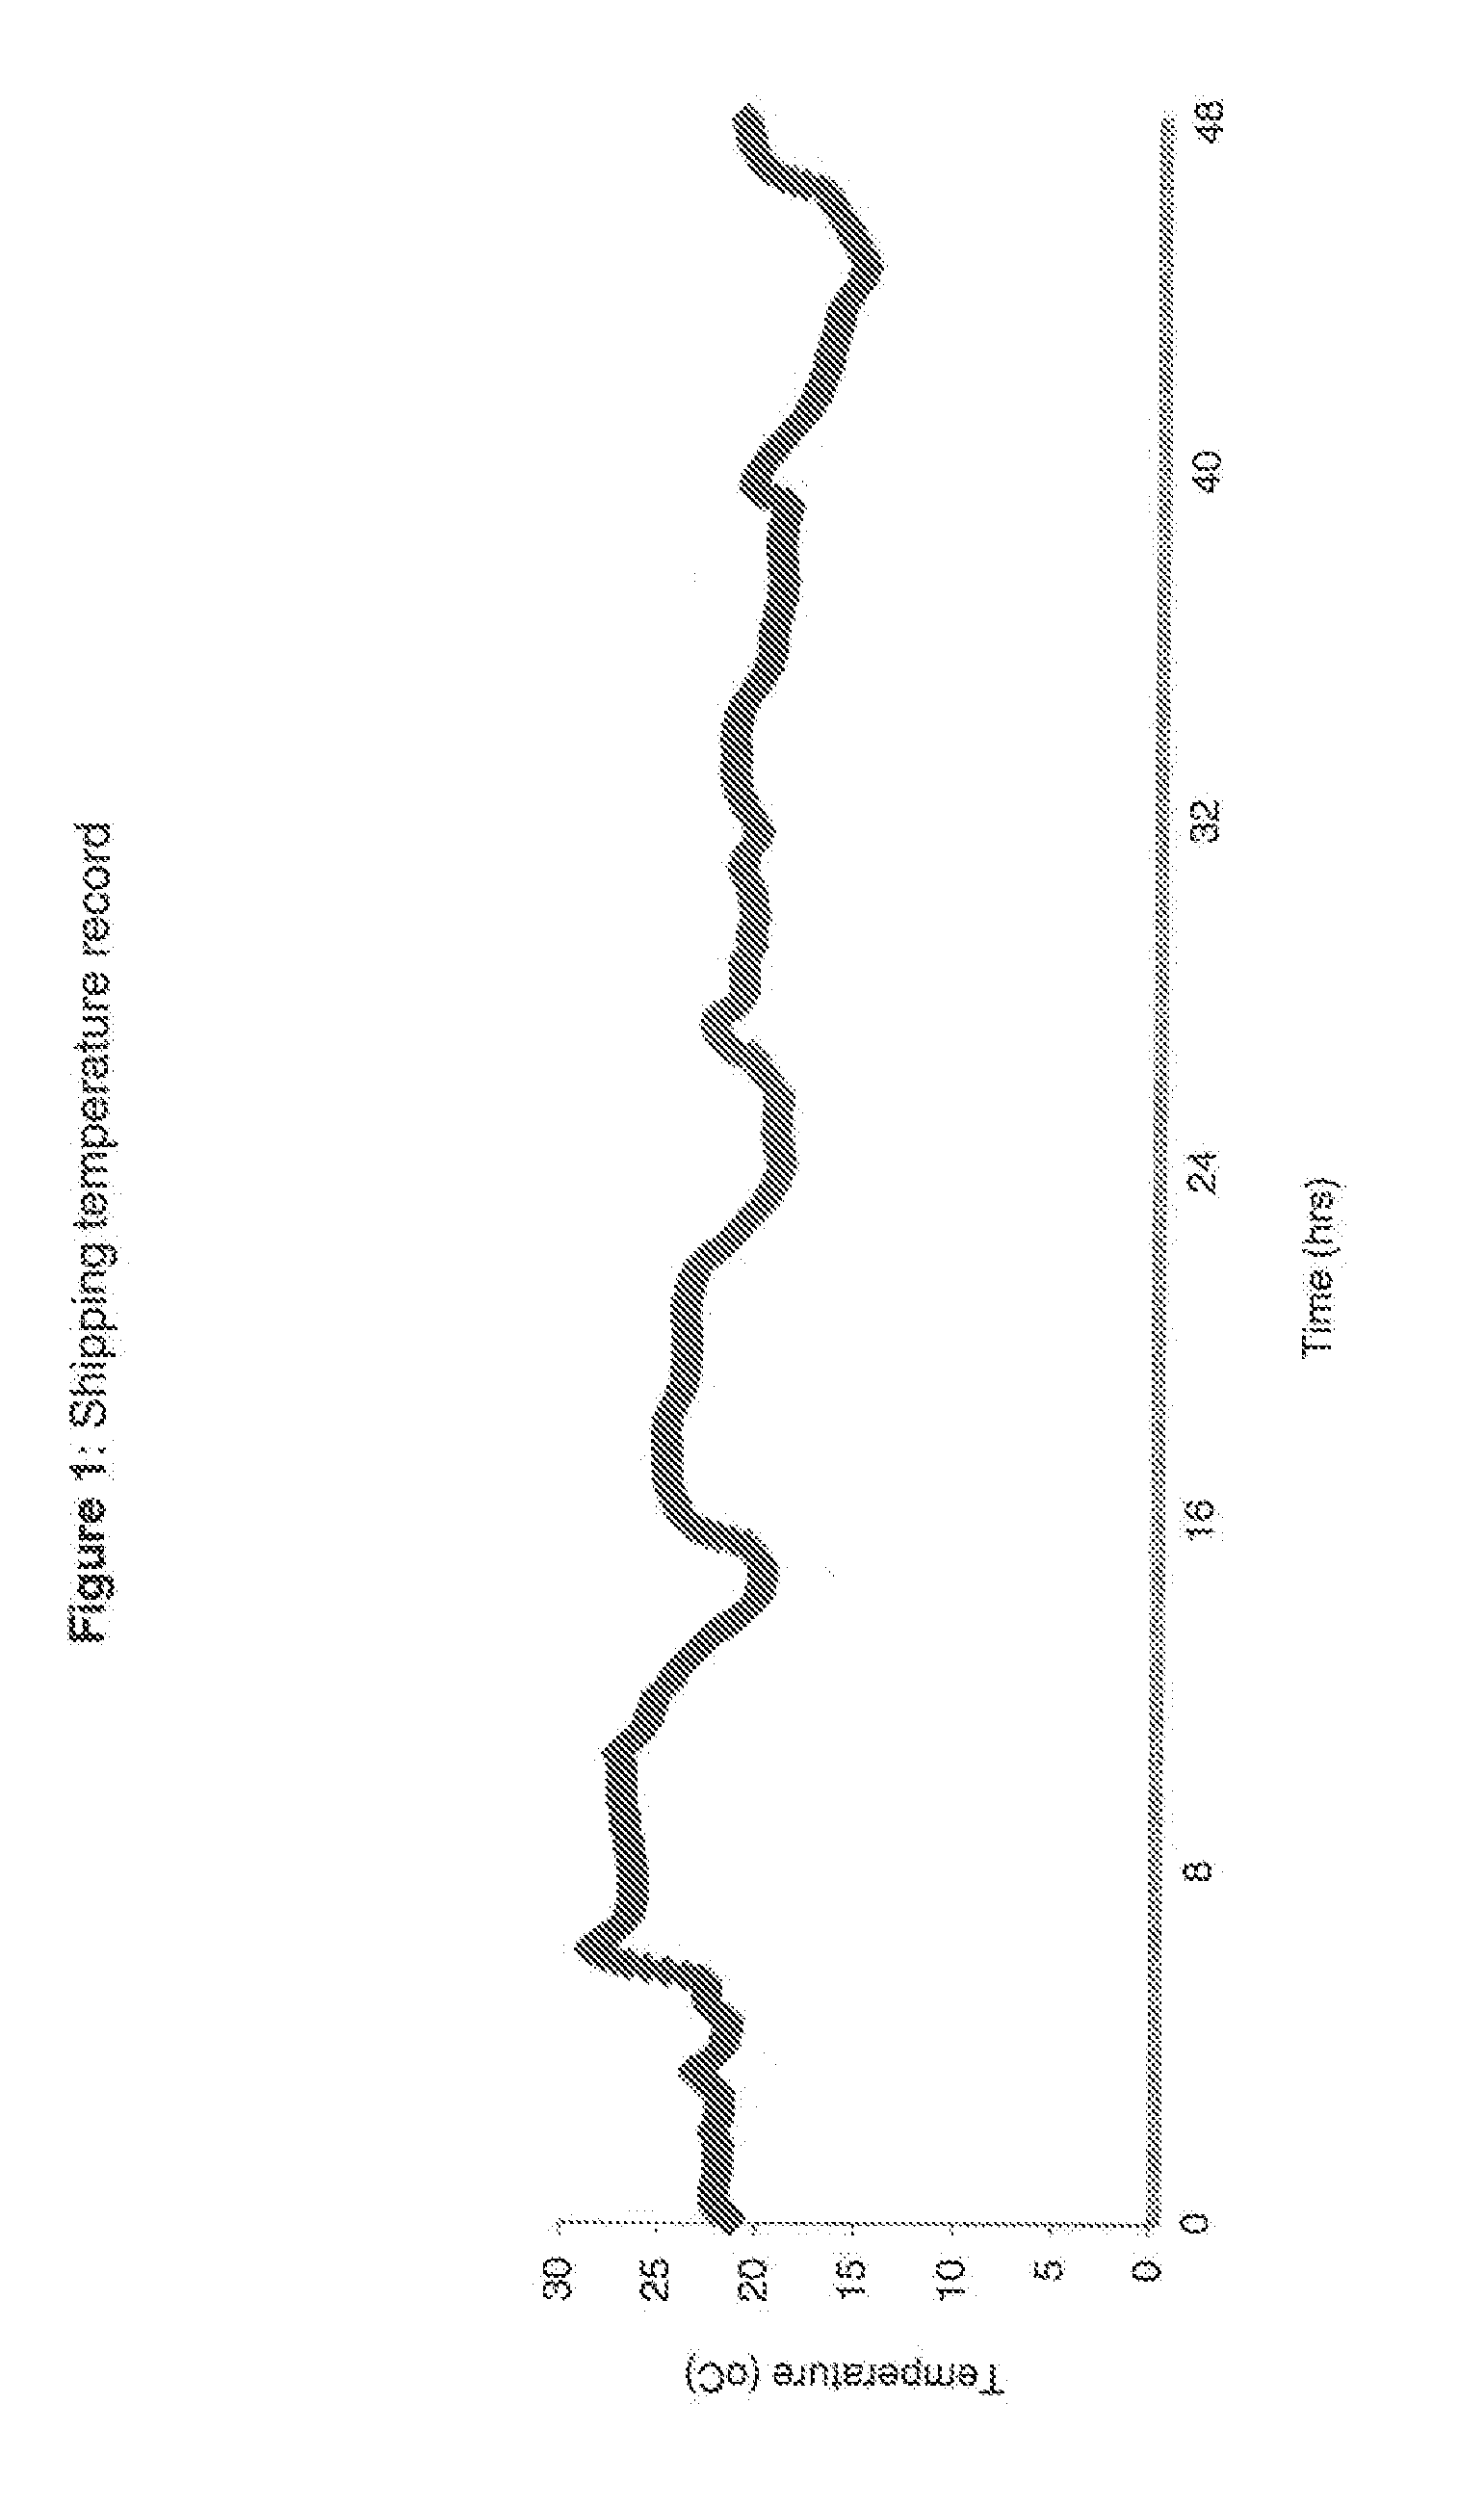 Blood collection device for stabilizing cell-free RNA in blood during sample shipping and storage